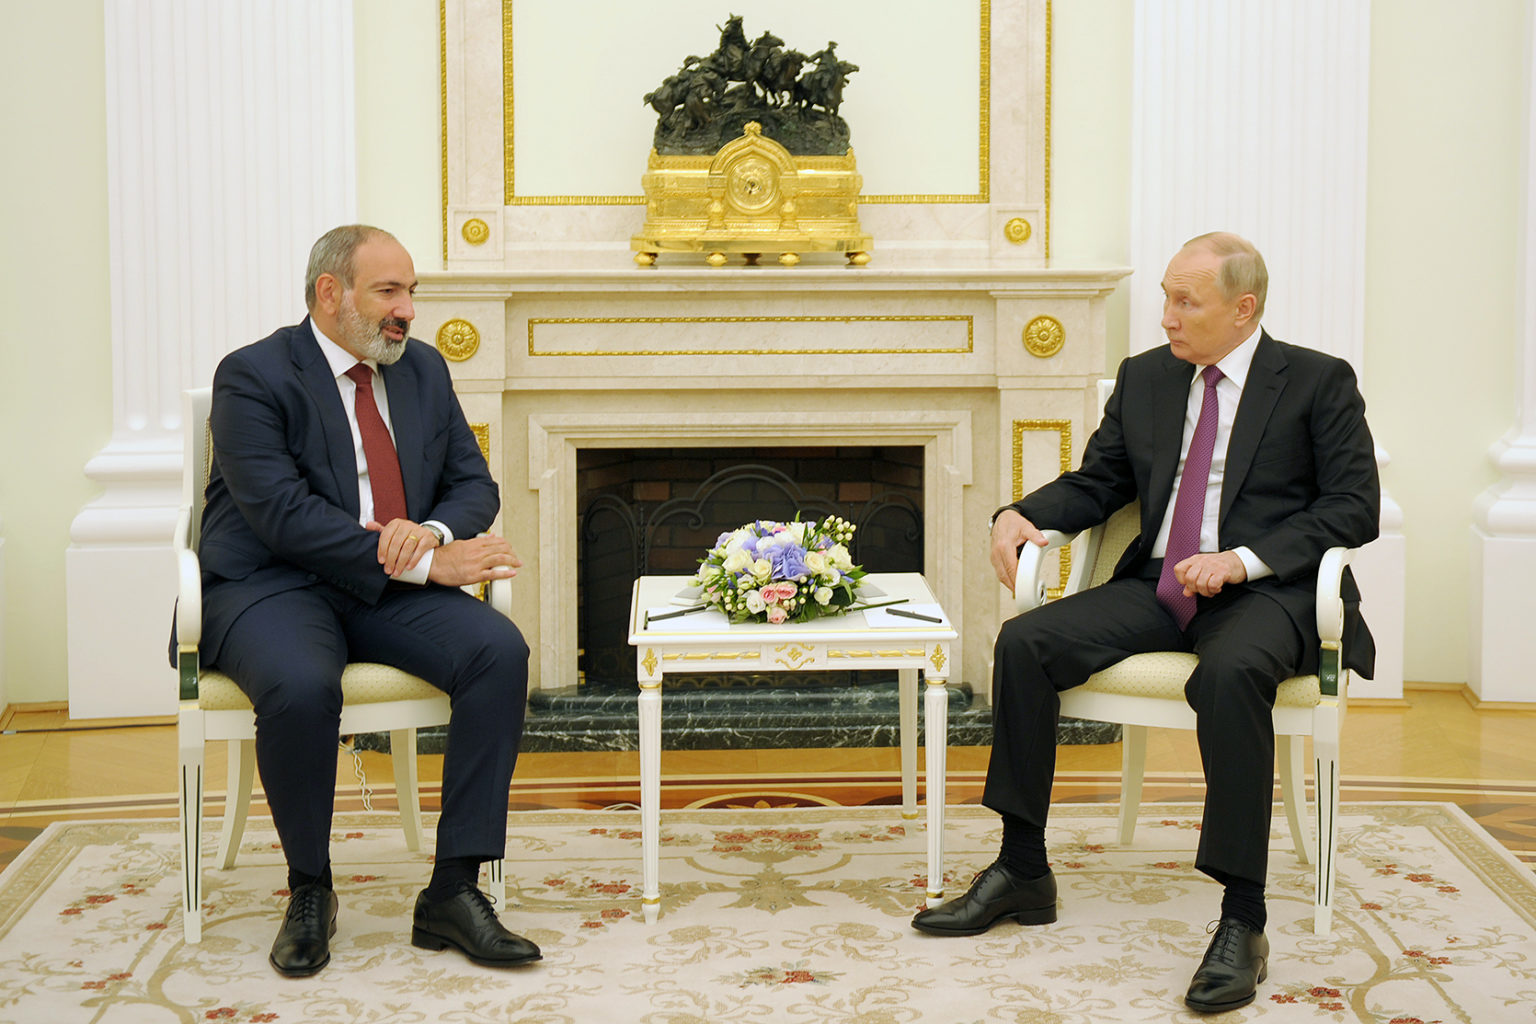 Acting Prime Minister Nikol Pashinyan pictured with Russian President Vladimir Putin during his working visit to Russia, July 7, 2021